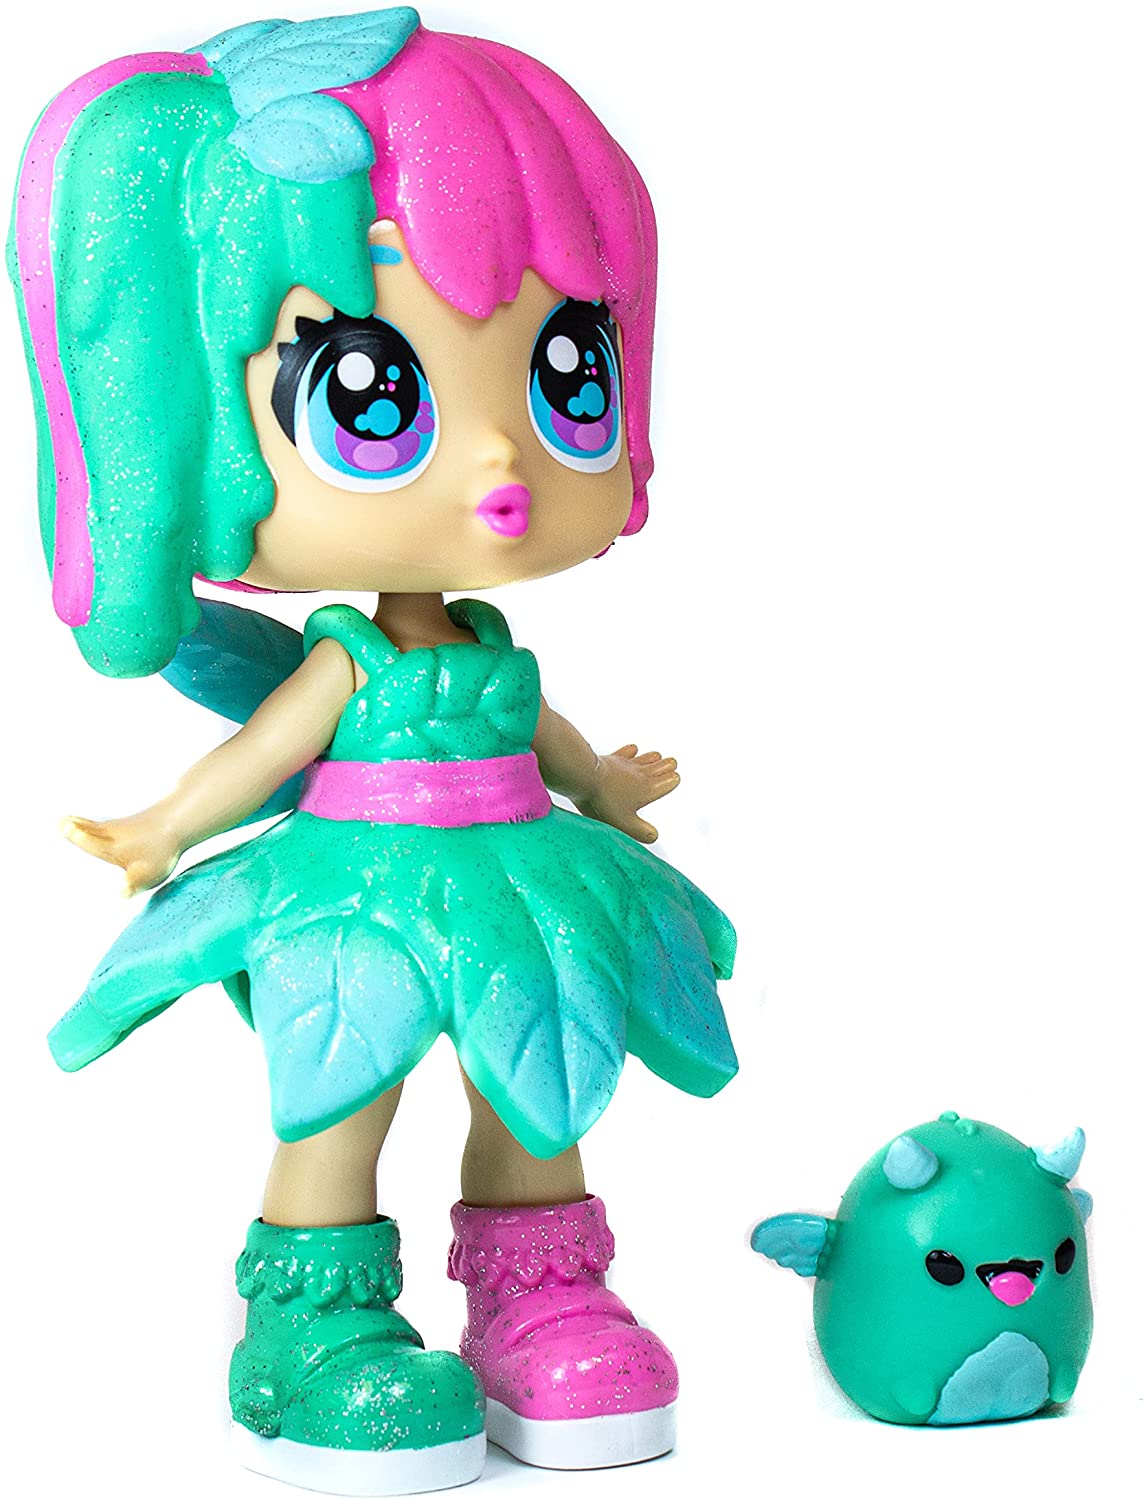 Bubble Trouble Doll - Minty Magic - Scented Squishy Doll - Dolls Heretoserveyou